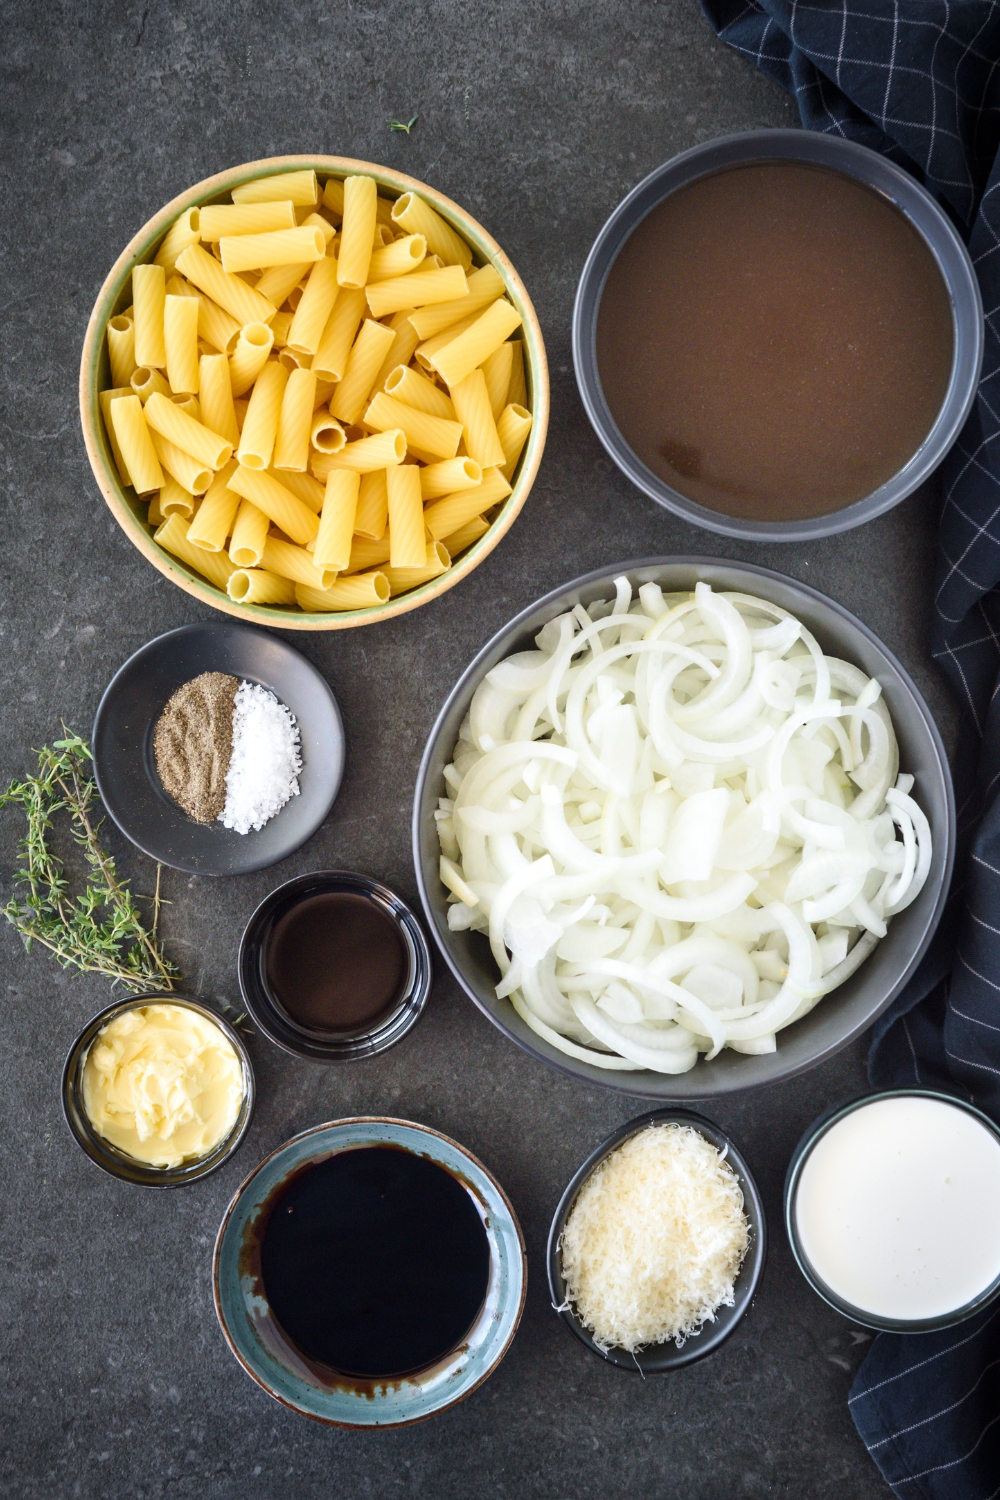 An assortment of ingredients including bowls of dried pasta, broth, sliced onions, cheese, cream, soy sauce, and seasonings on a black counter.